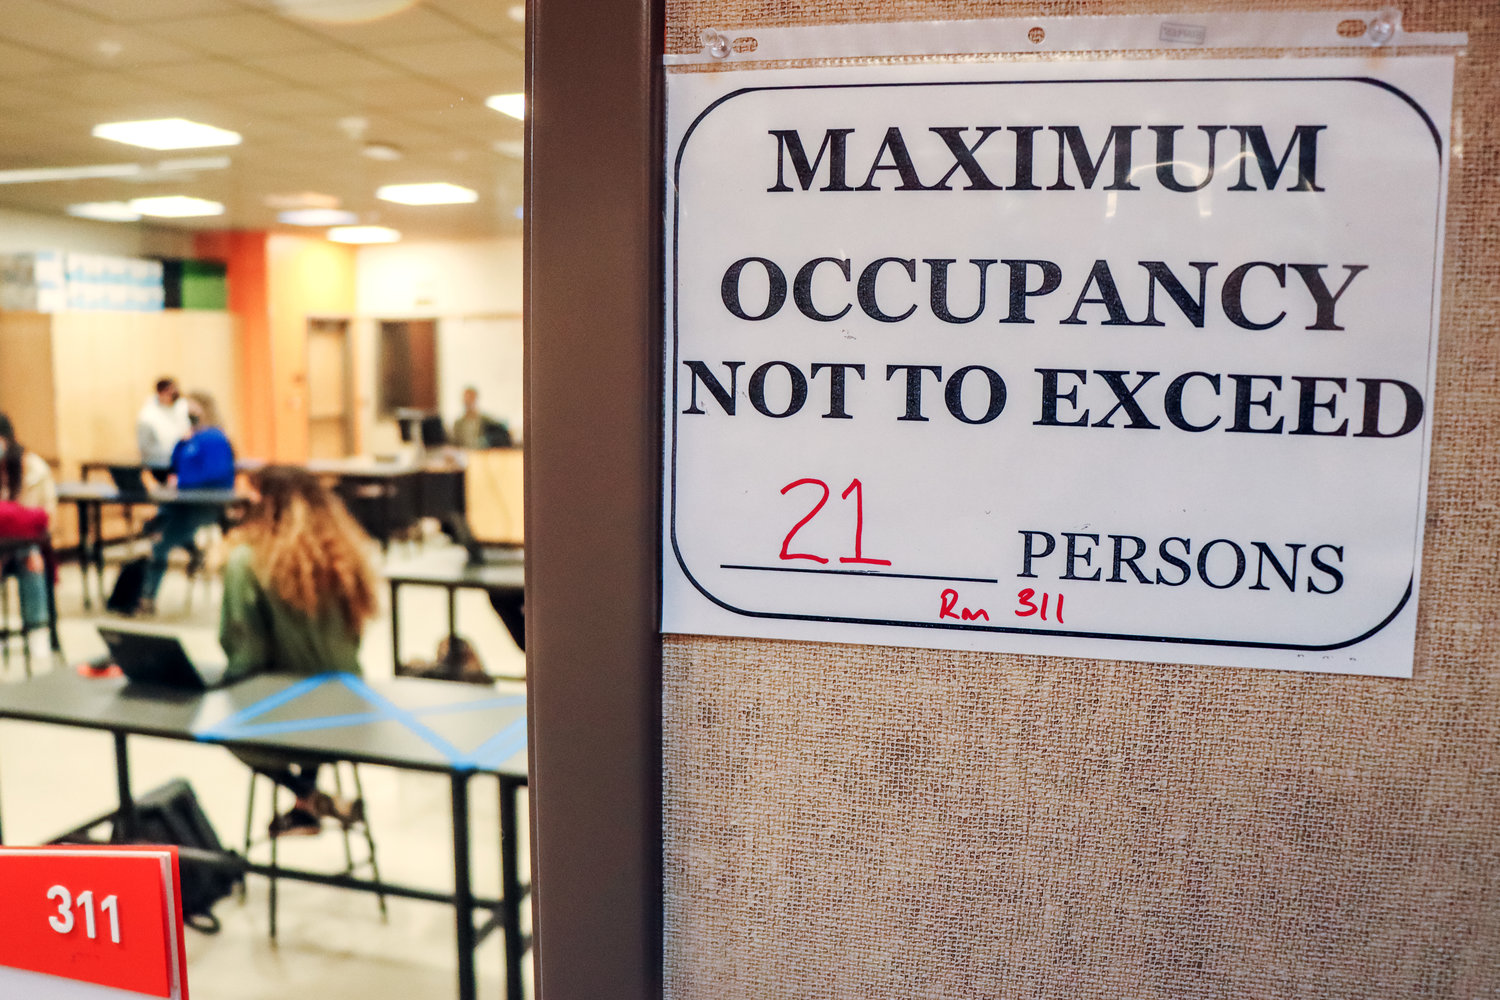 Maximum occupancy is set at 21 for one classroom Friday morning in Centralia High School.